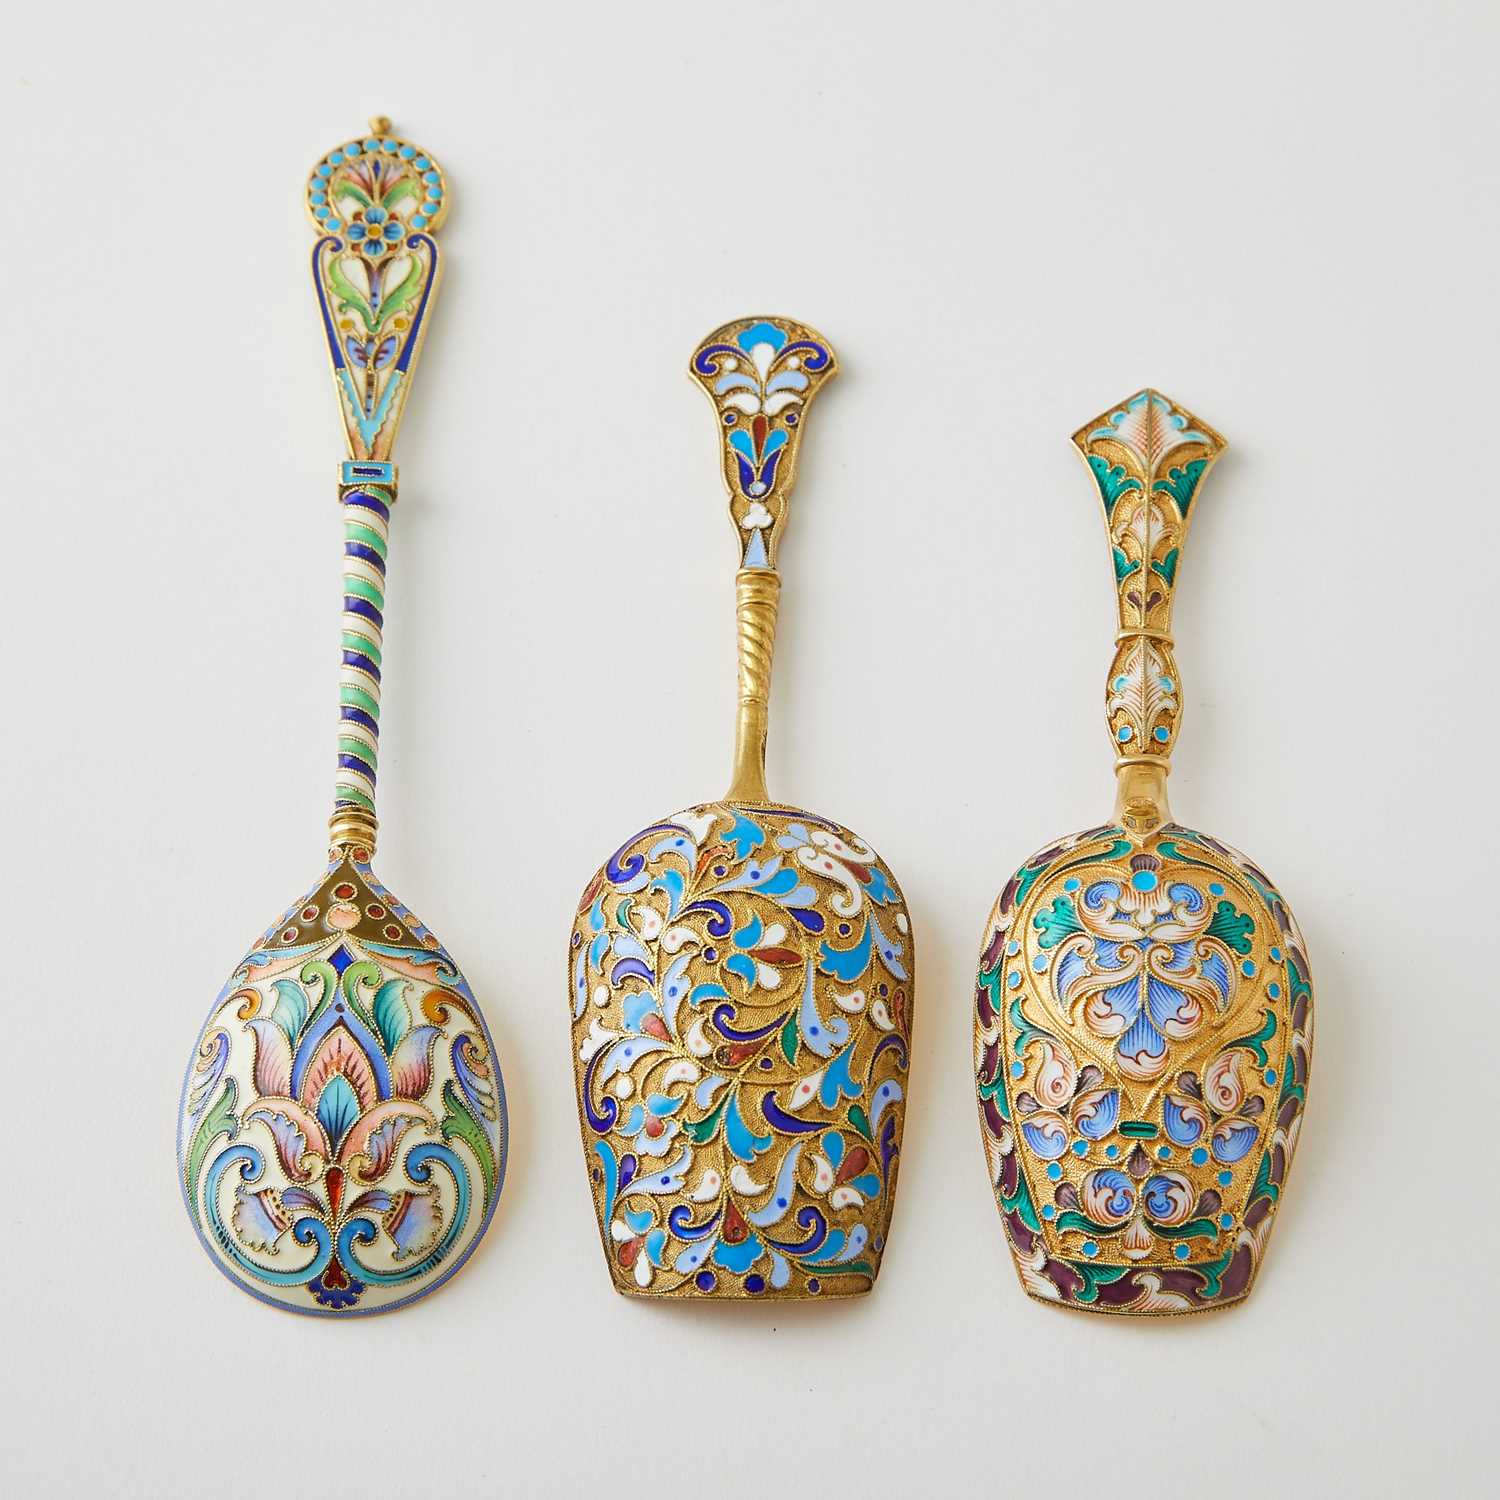 Lot 614 - Group of Russian Silver-Gilt and Cloisonné Enamel Articles